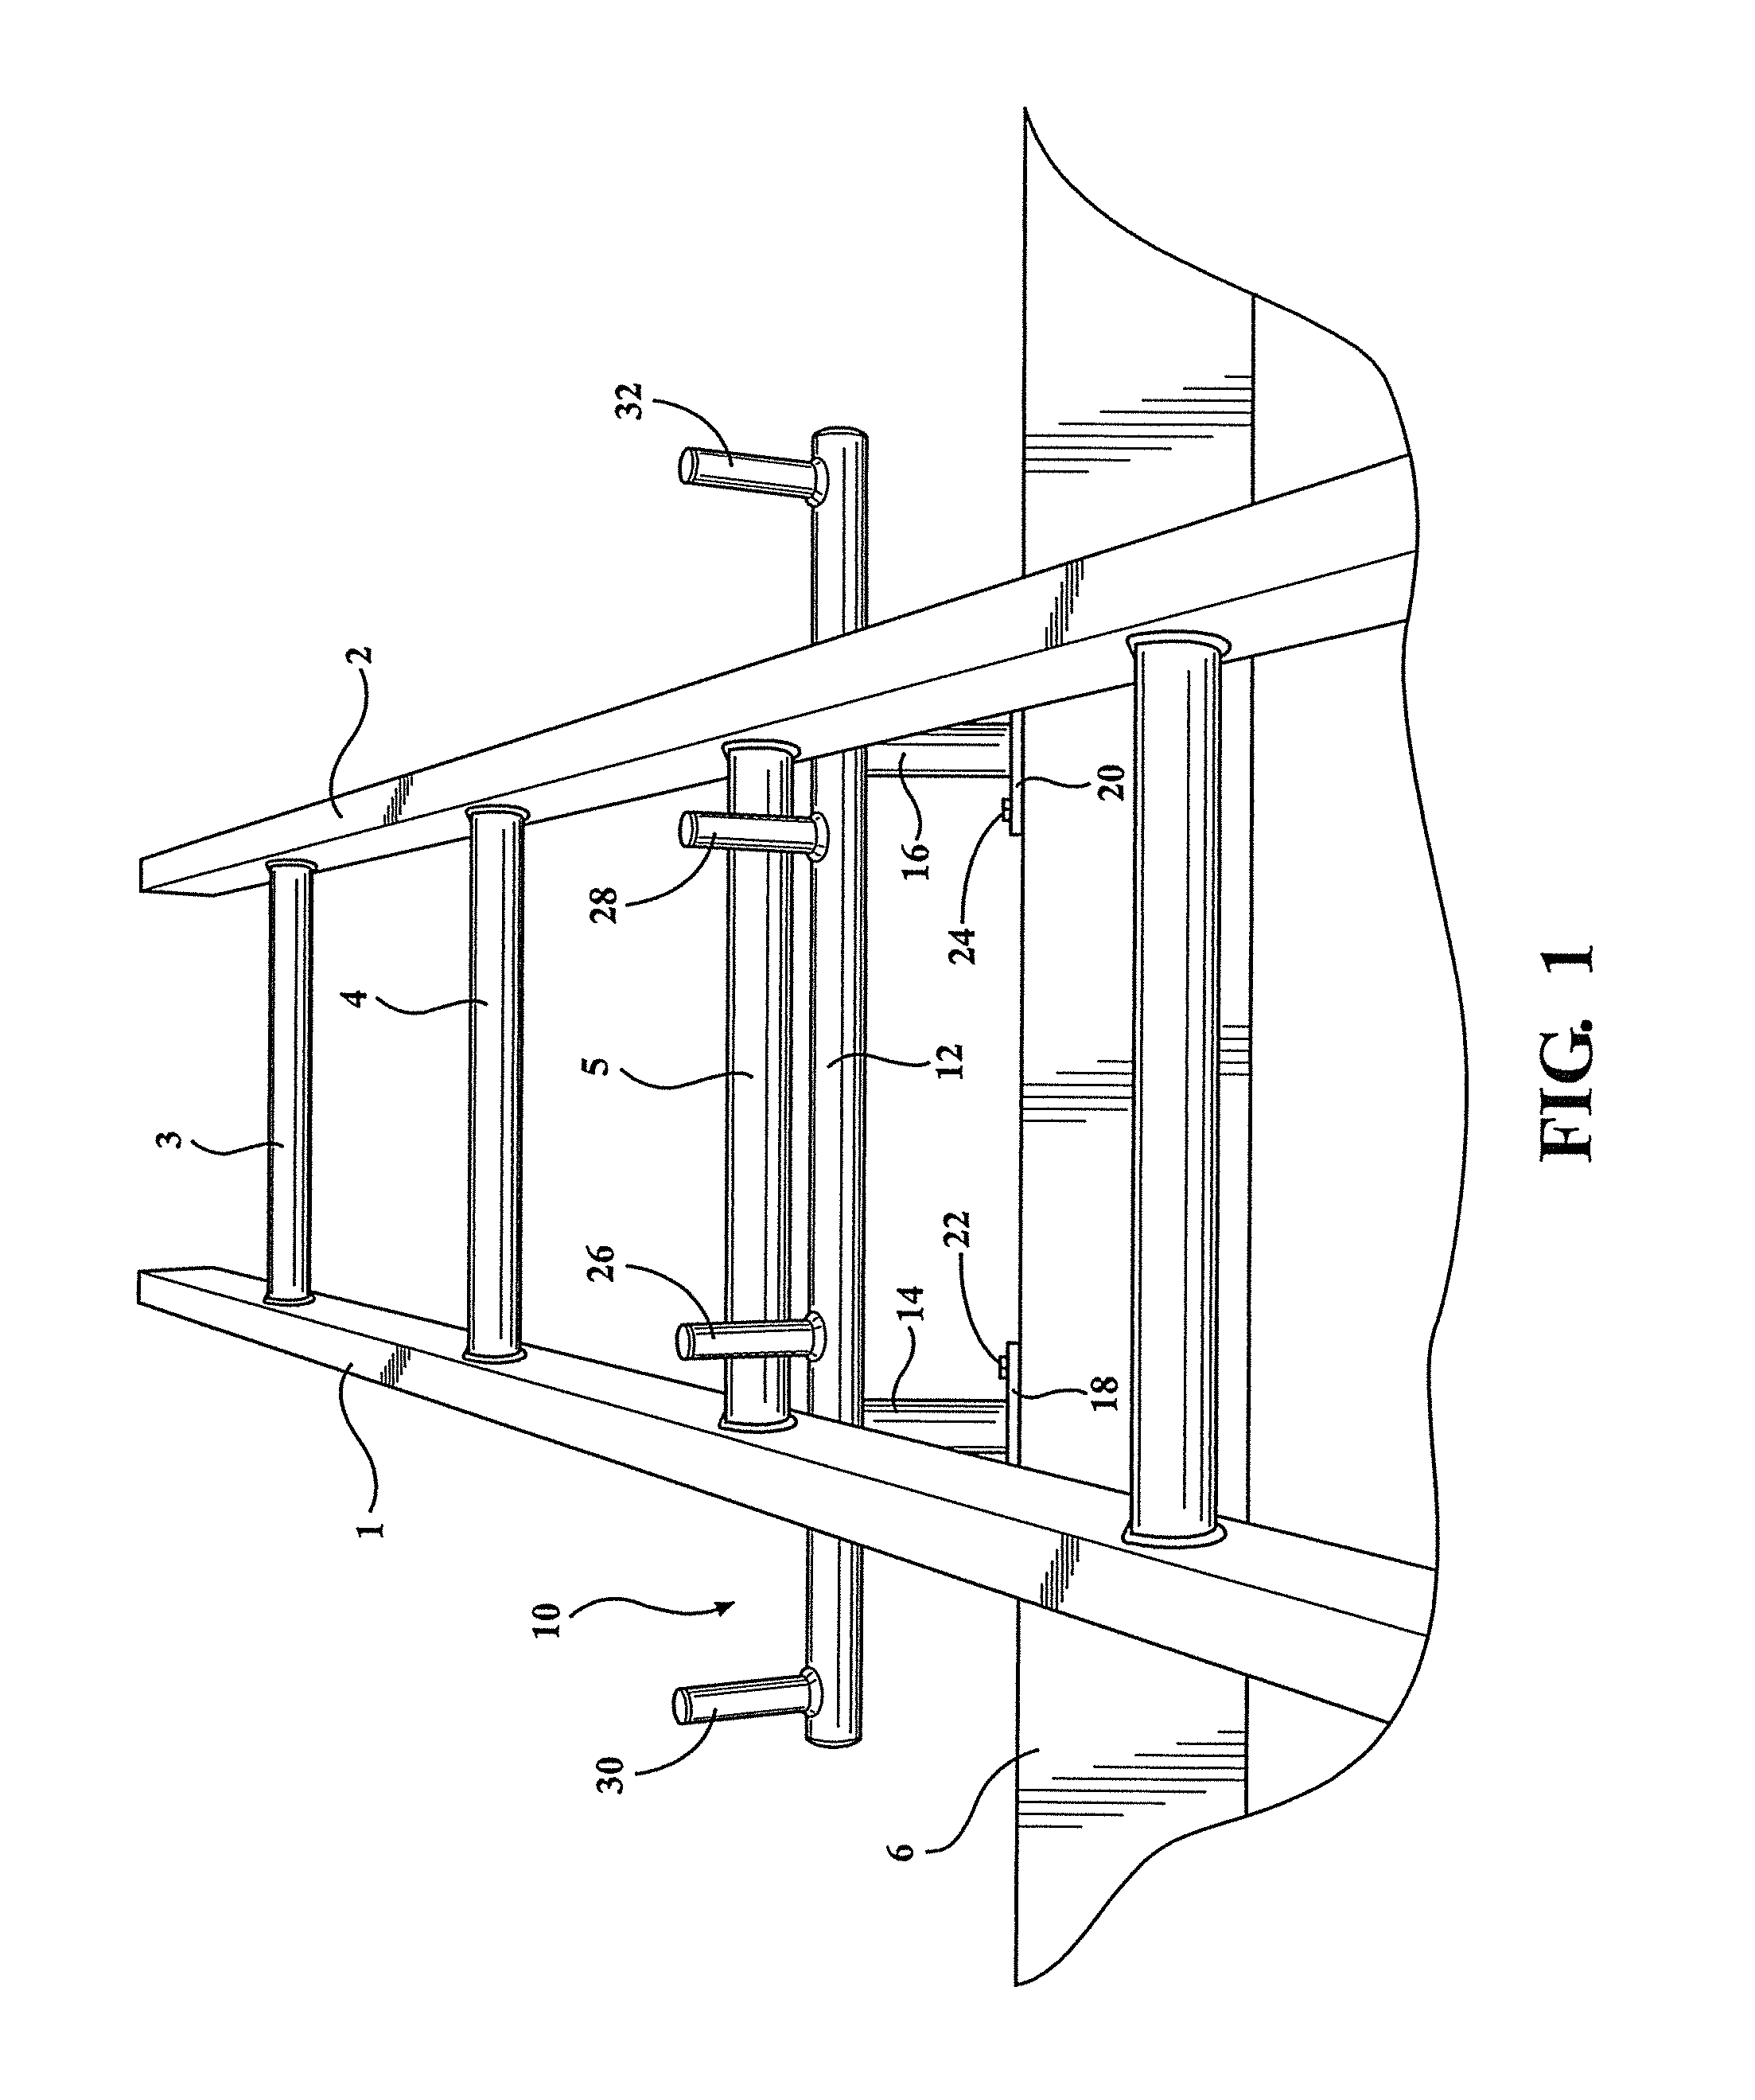 Ladder rest and restraining device